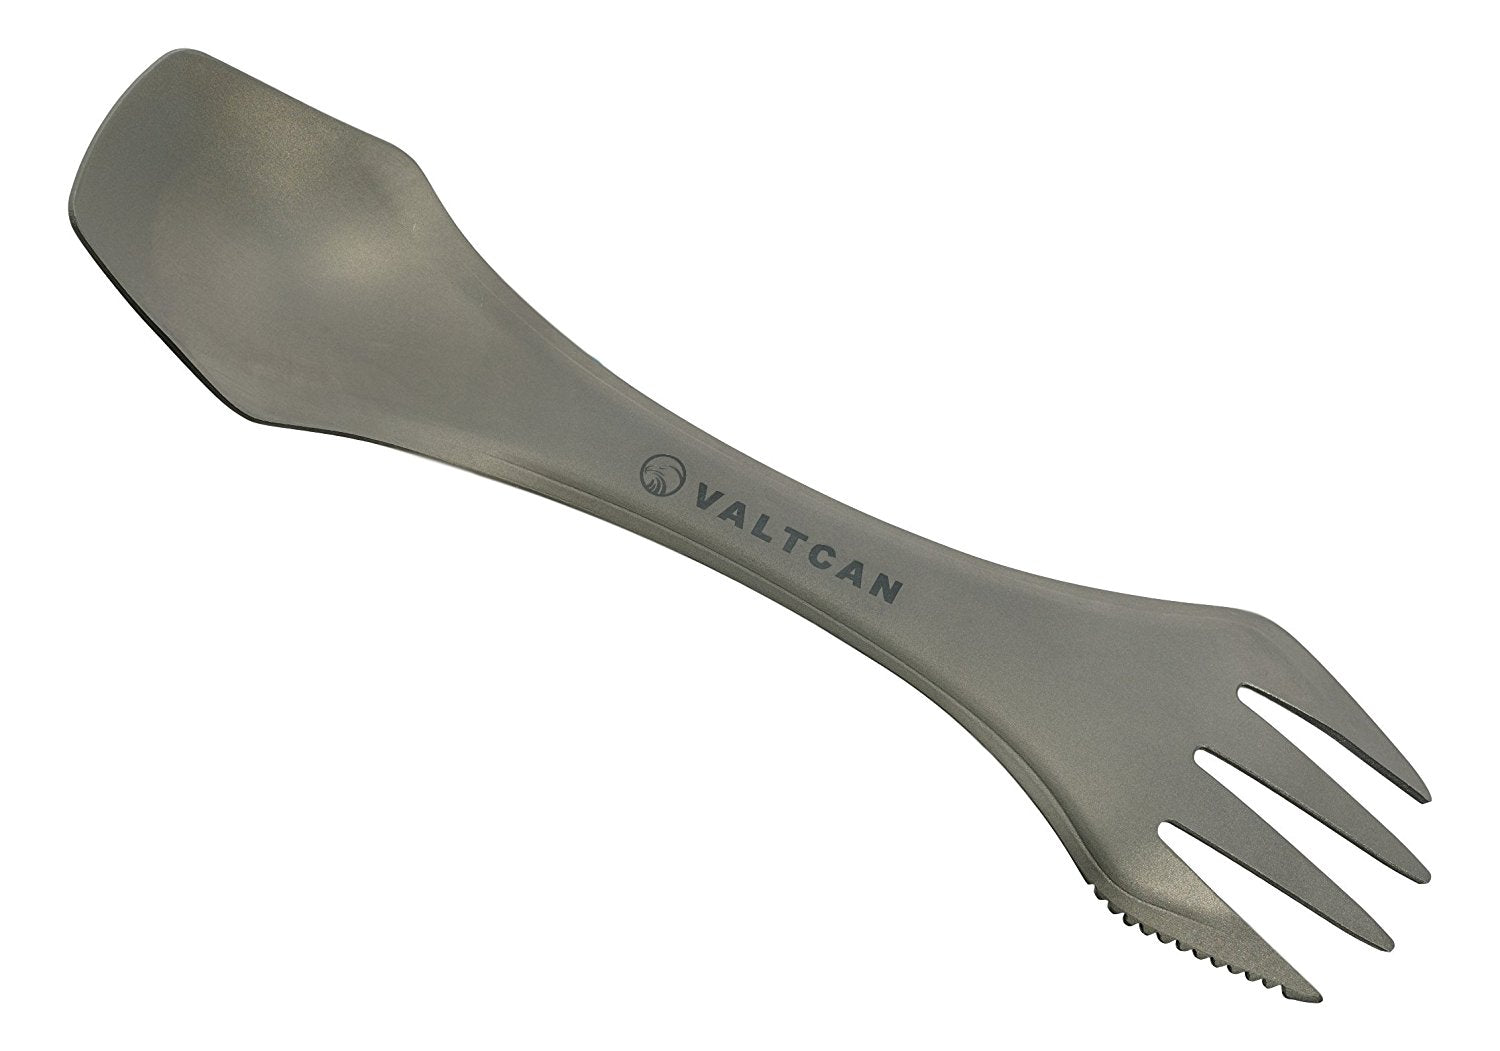 Valtcan Titanium Compact 3 Piece Utensil Fork Spoon Knife Ultralight Carry Military Design System